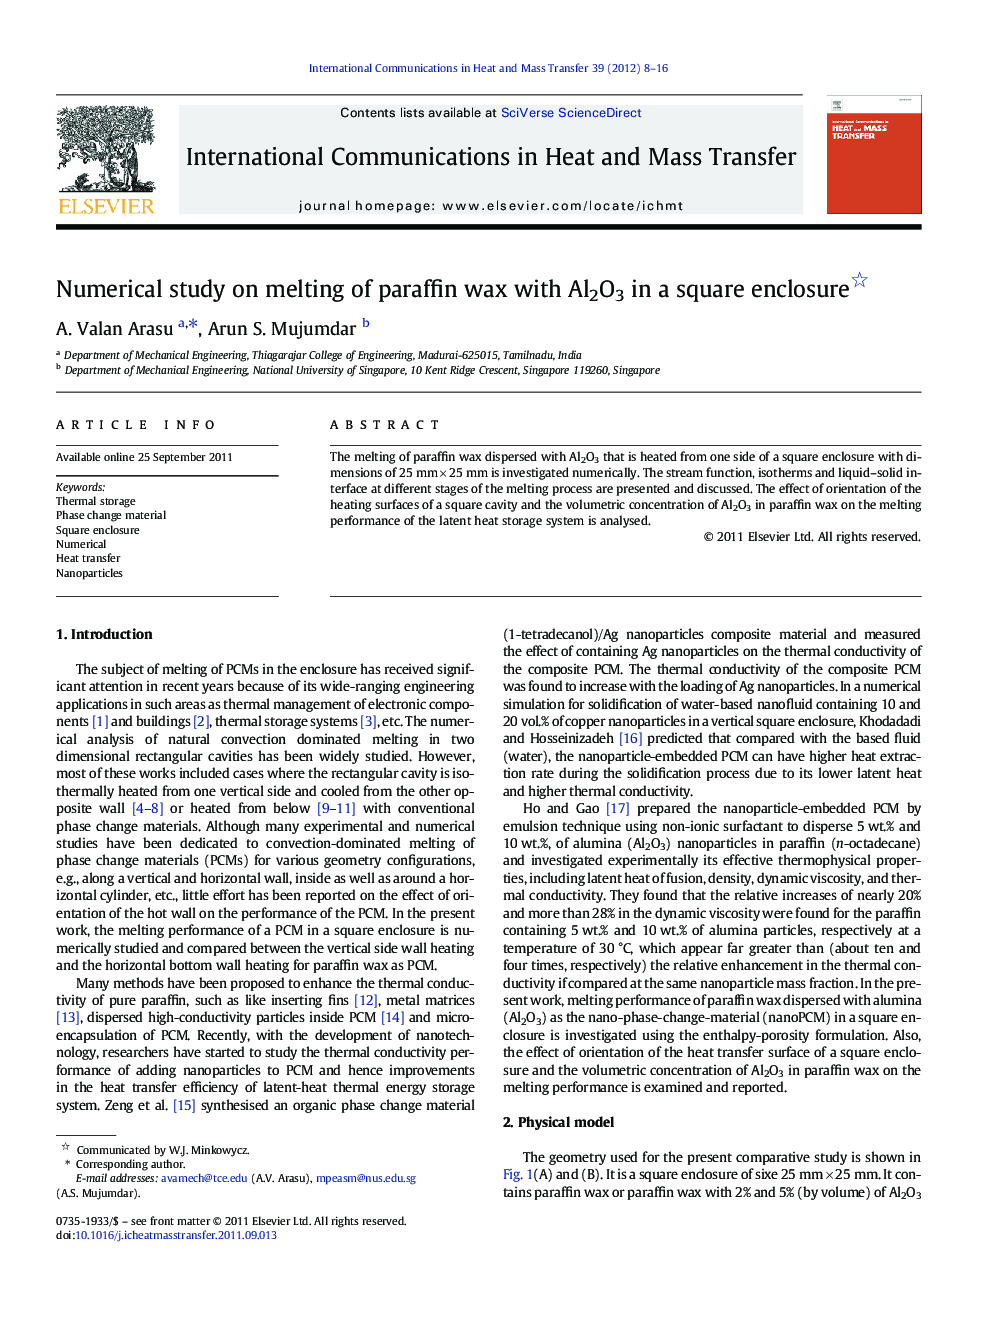 Numerical study on melting of paraffin wax with Al2O3 in a square enclosure 